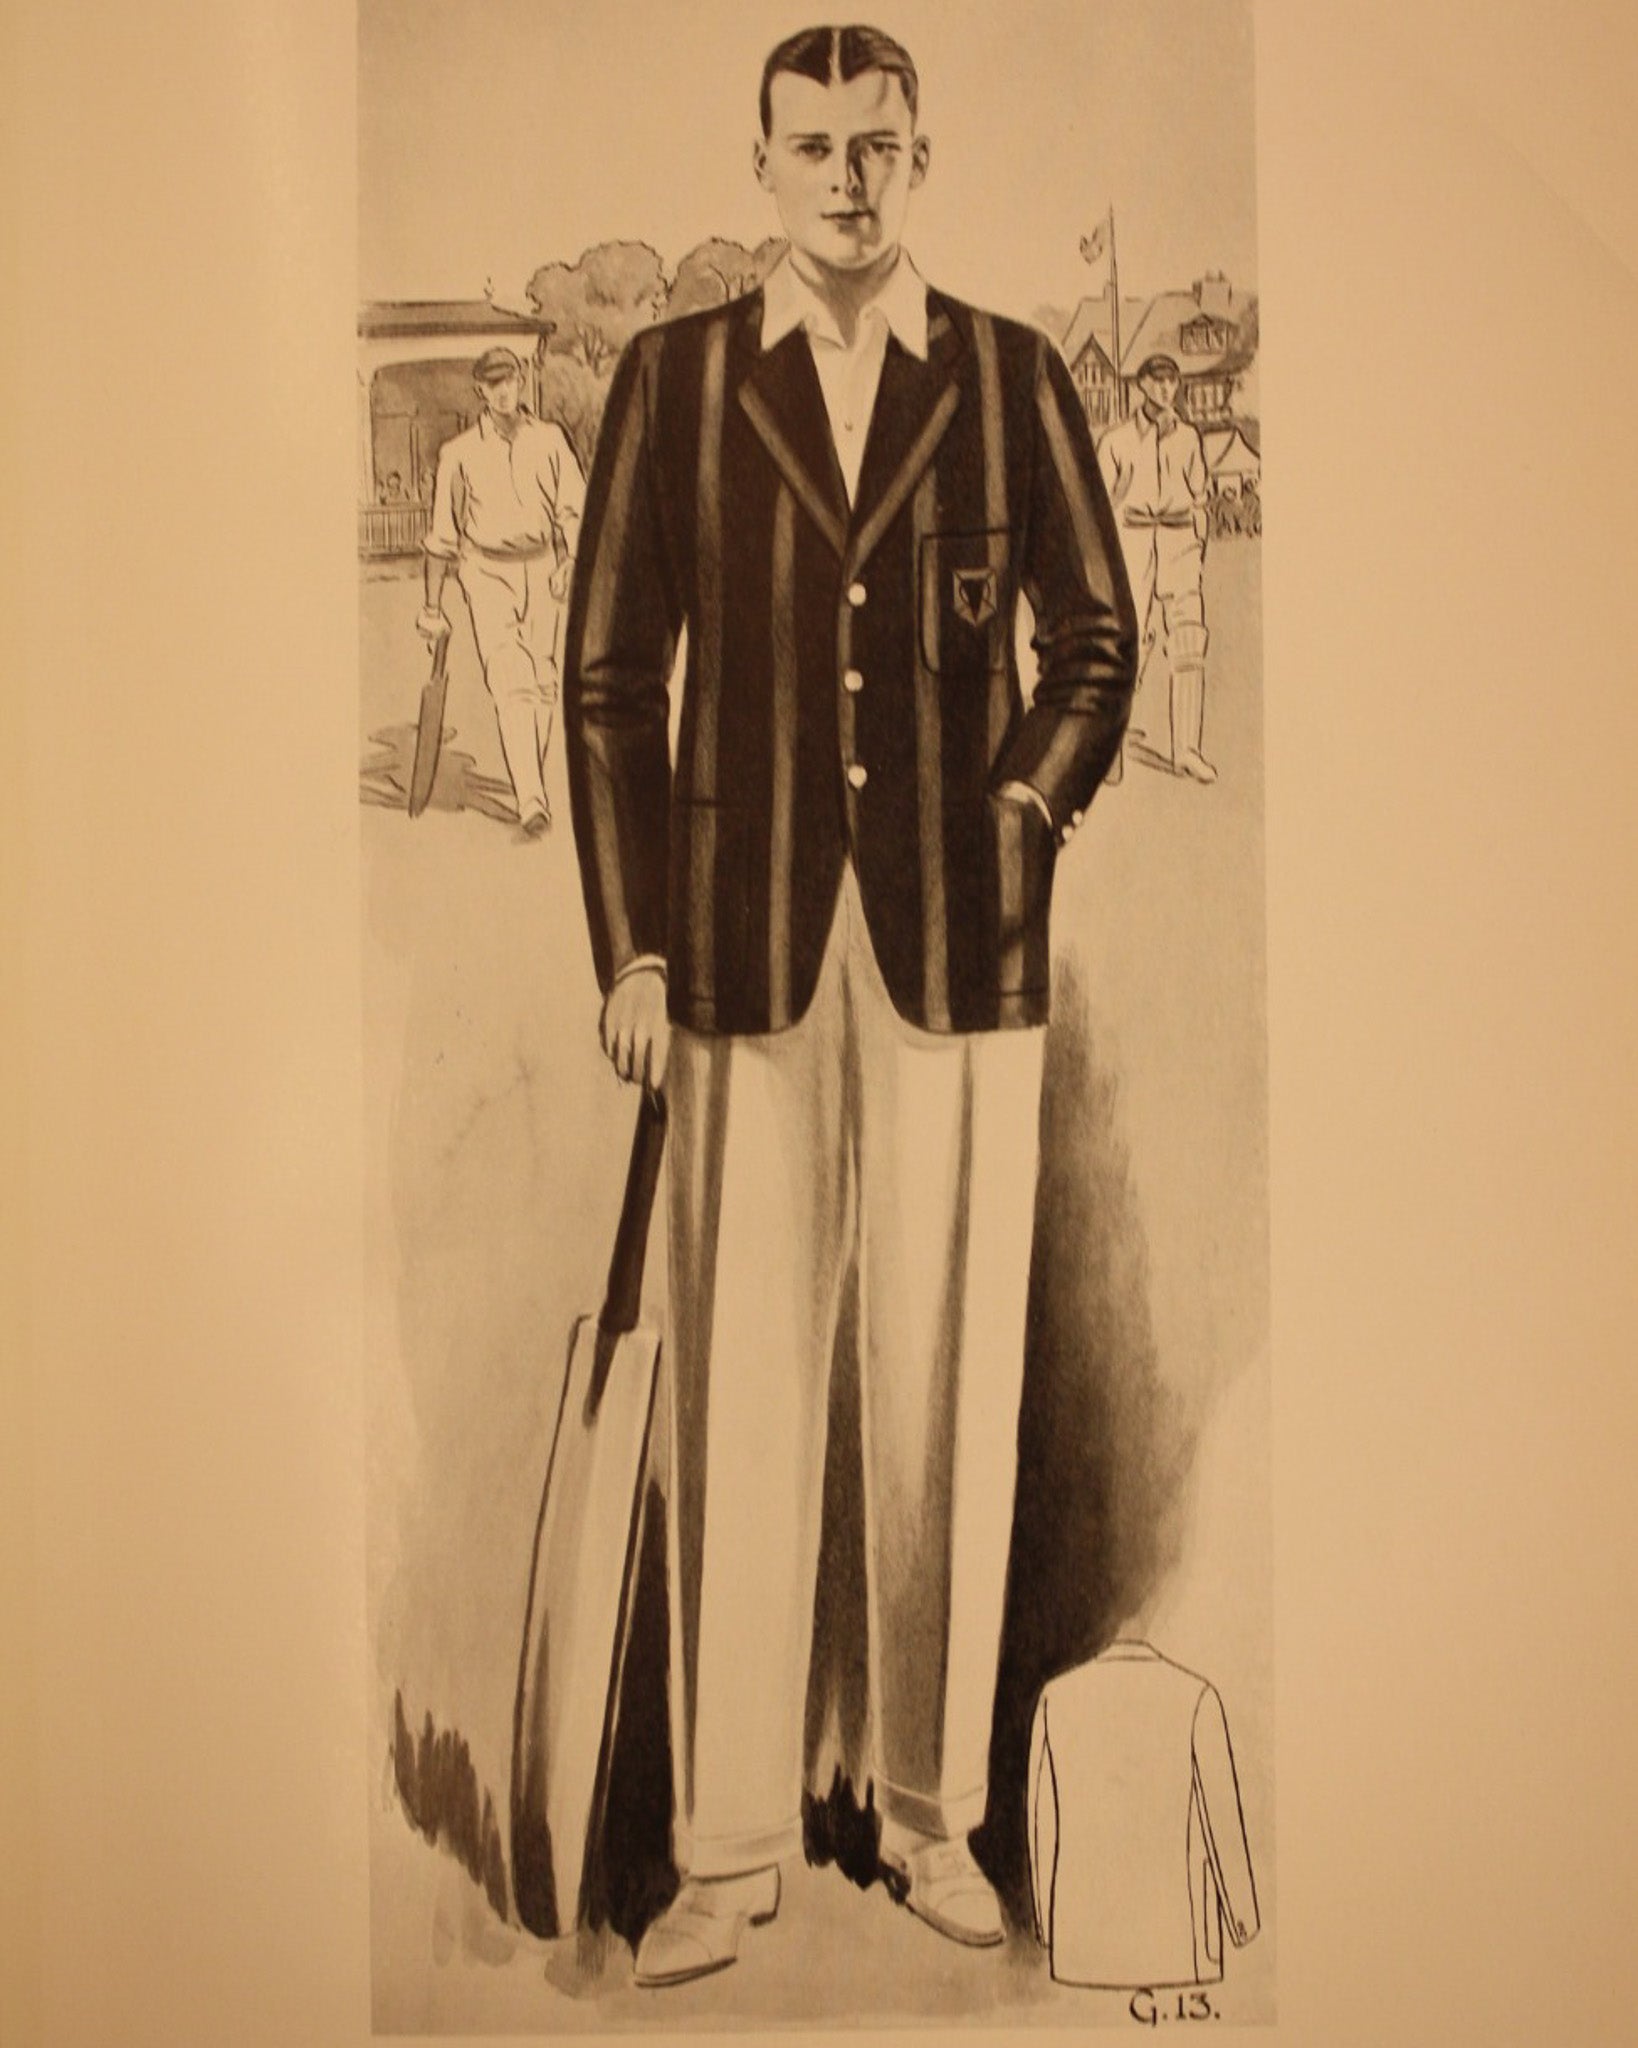 she wearing silk gentleman's suit with long tie and trousers